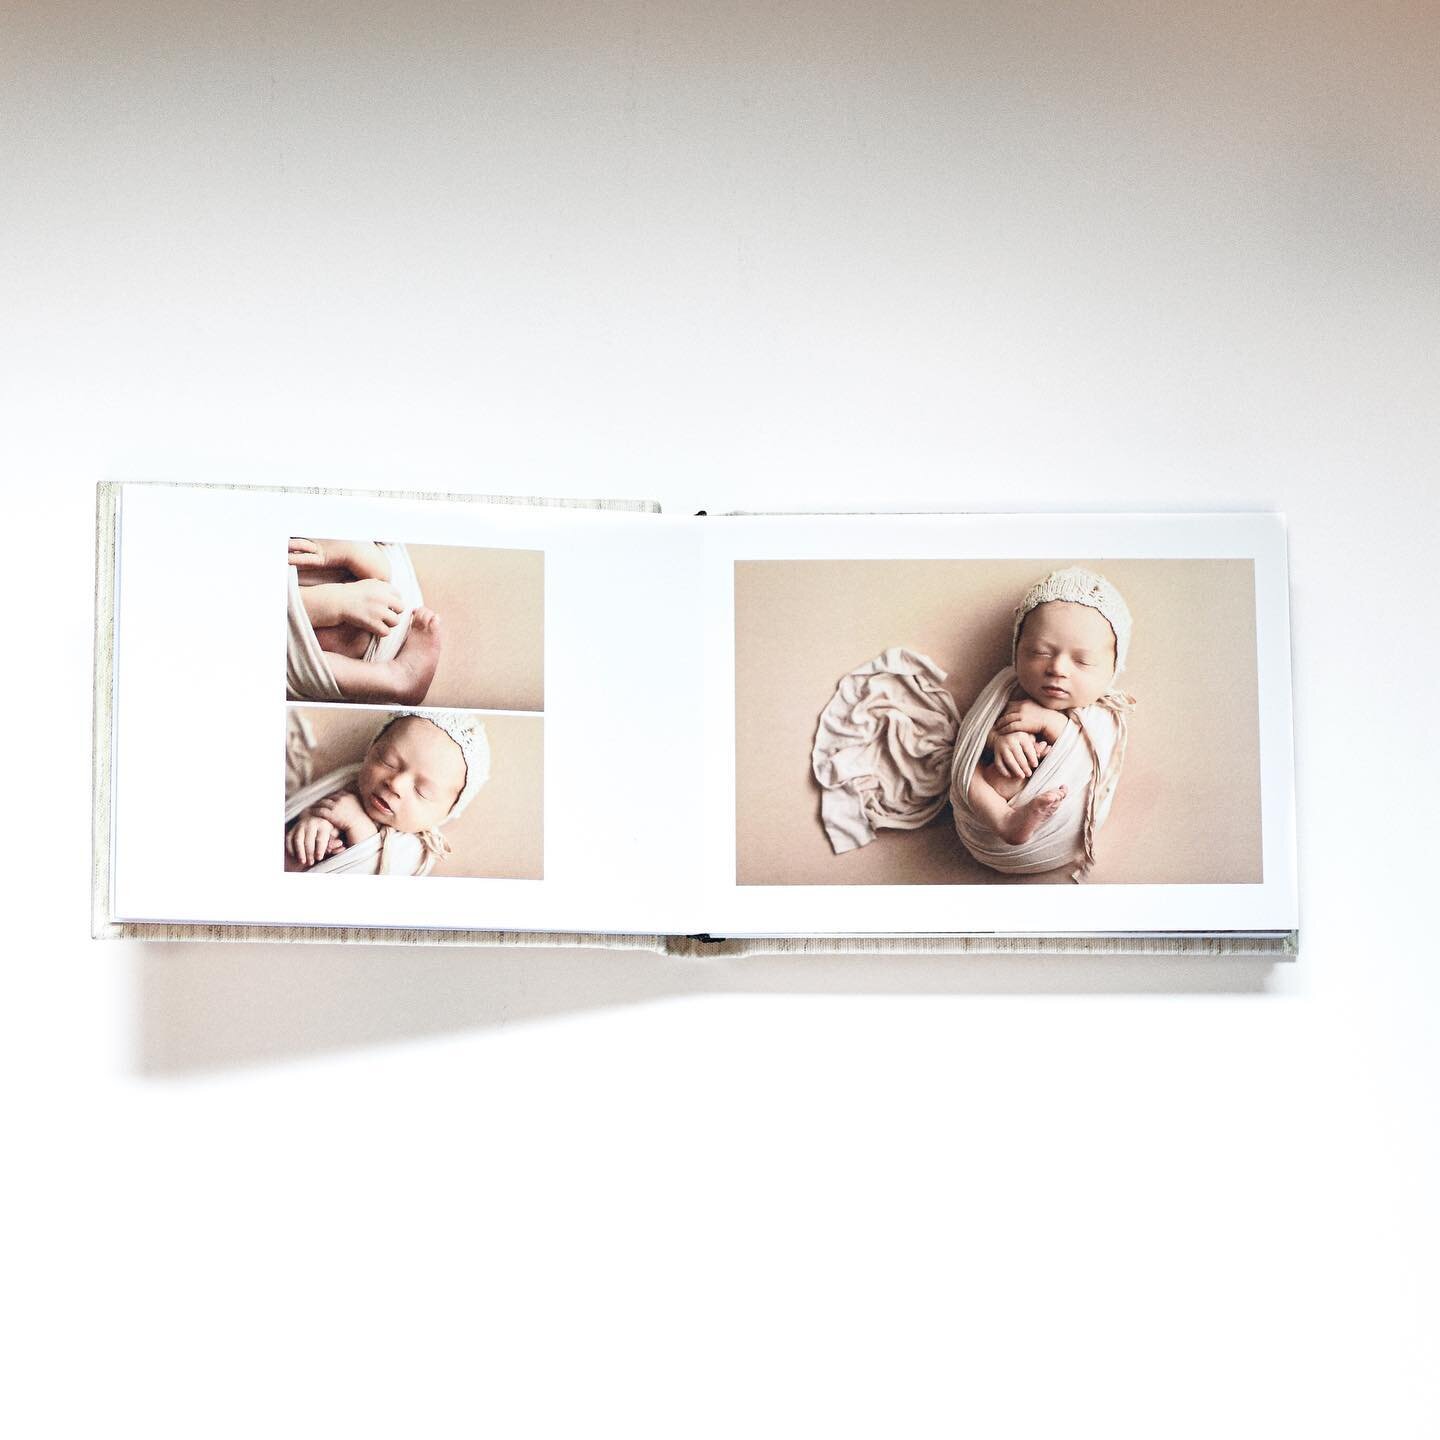 There&rsquo;s always something special about putting together an album of a babies first moments here on earth
.
Swipe to see the exterior linen cover + its box- which doubles as a frame that can be put in your baby&rsquo;s room🤍

#whitespace #album